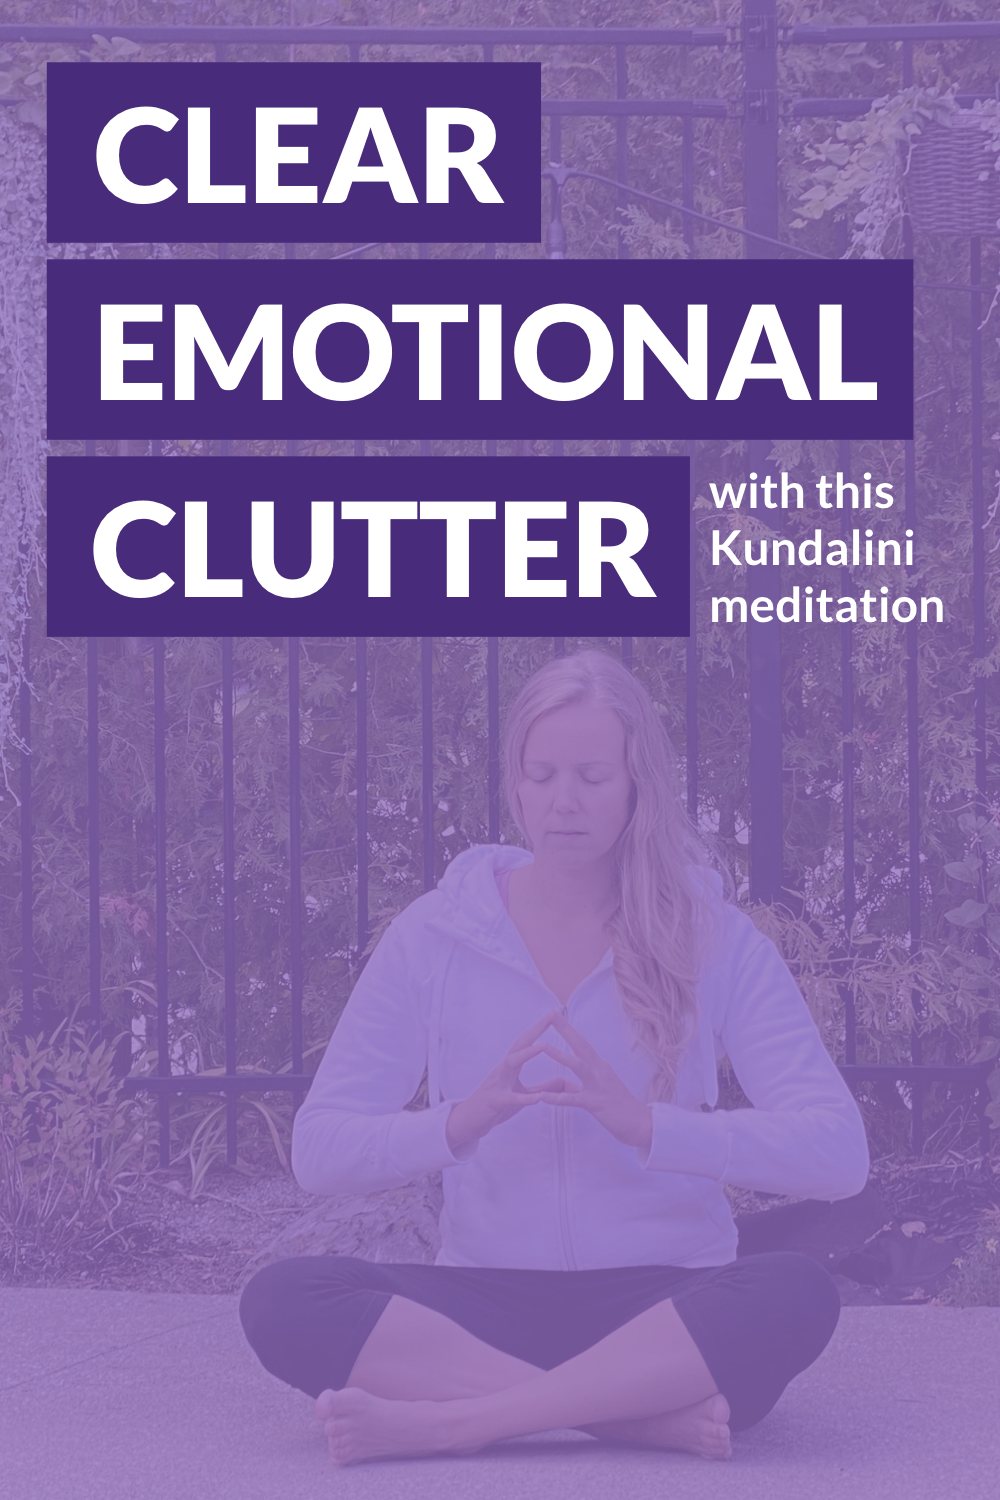 Meditation to clear emotions of the past